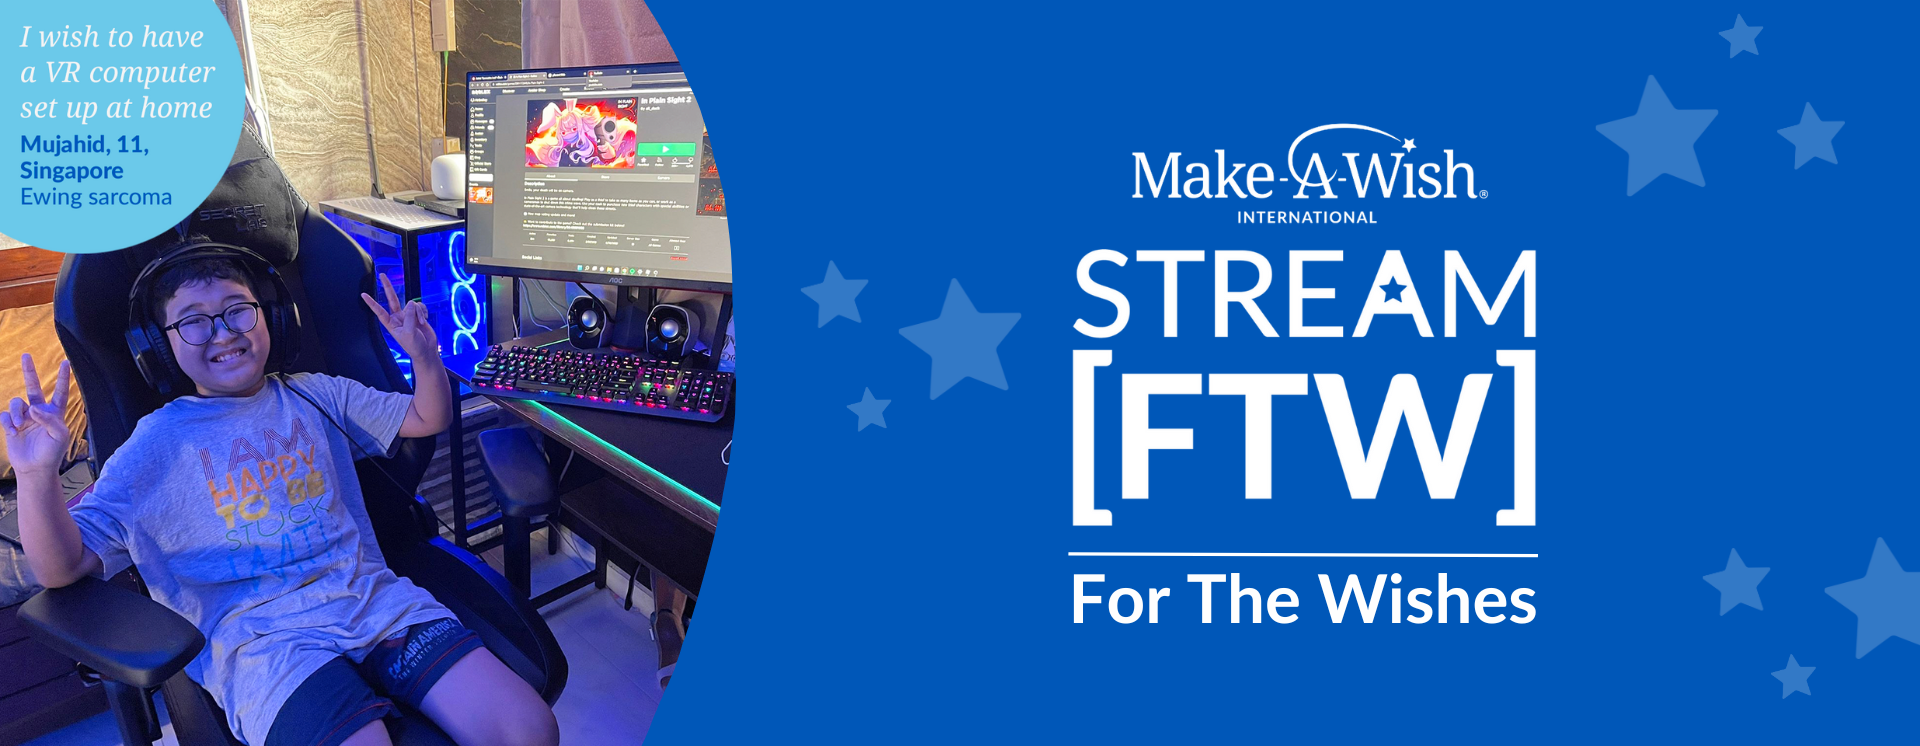 Stream FTW banner with wish images